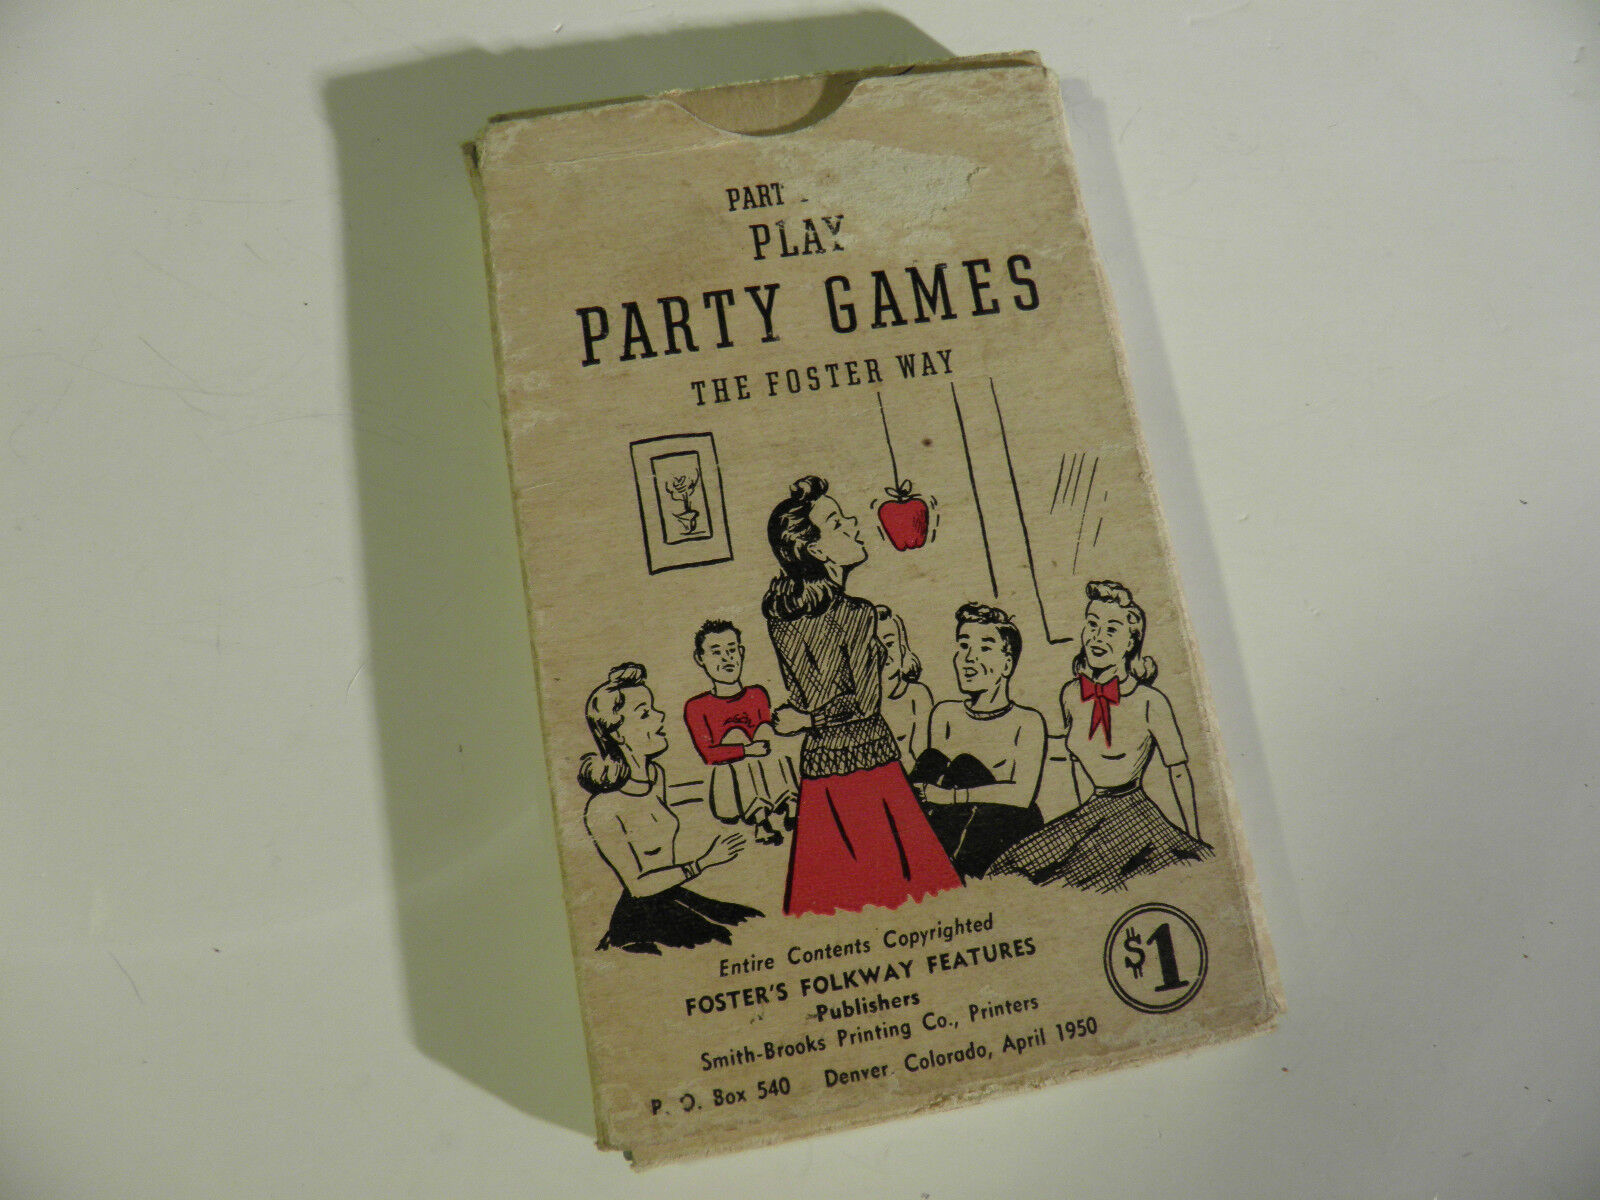 VTG 1950 Card Book of Social Party Games Foster's Folkway Features Modern Retro